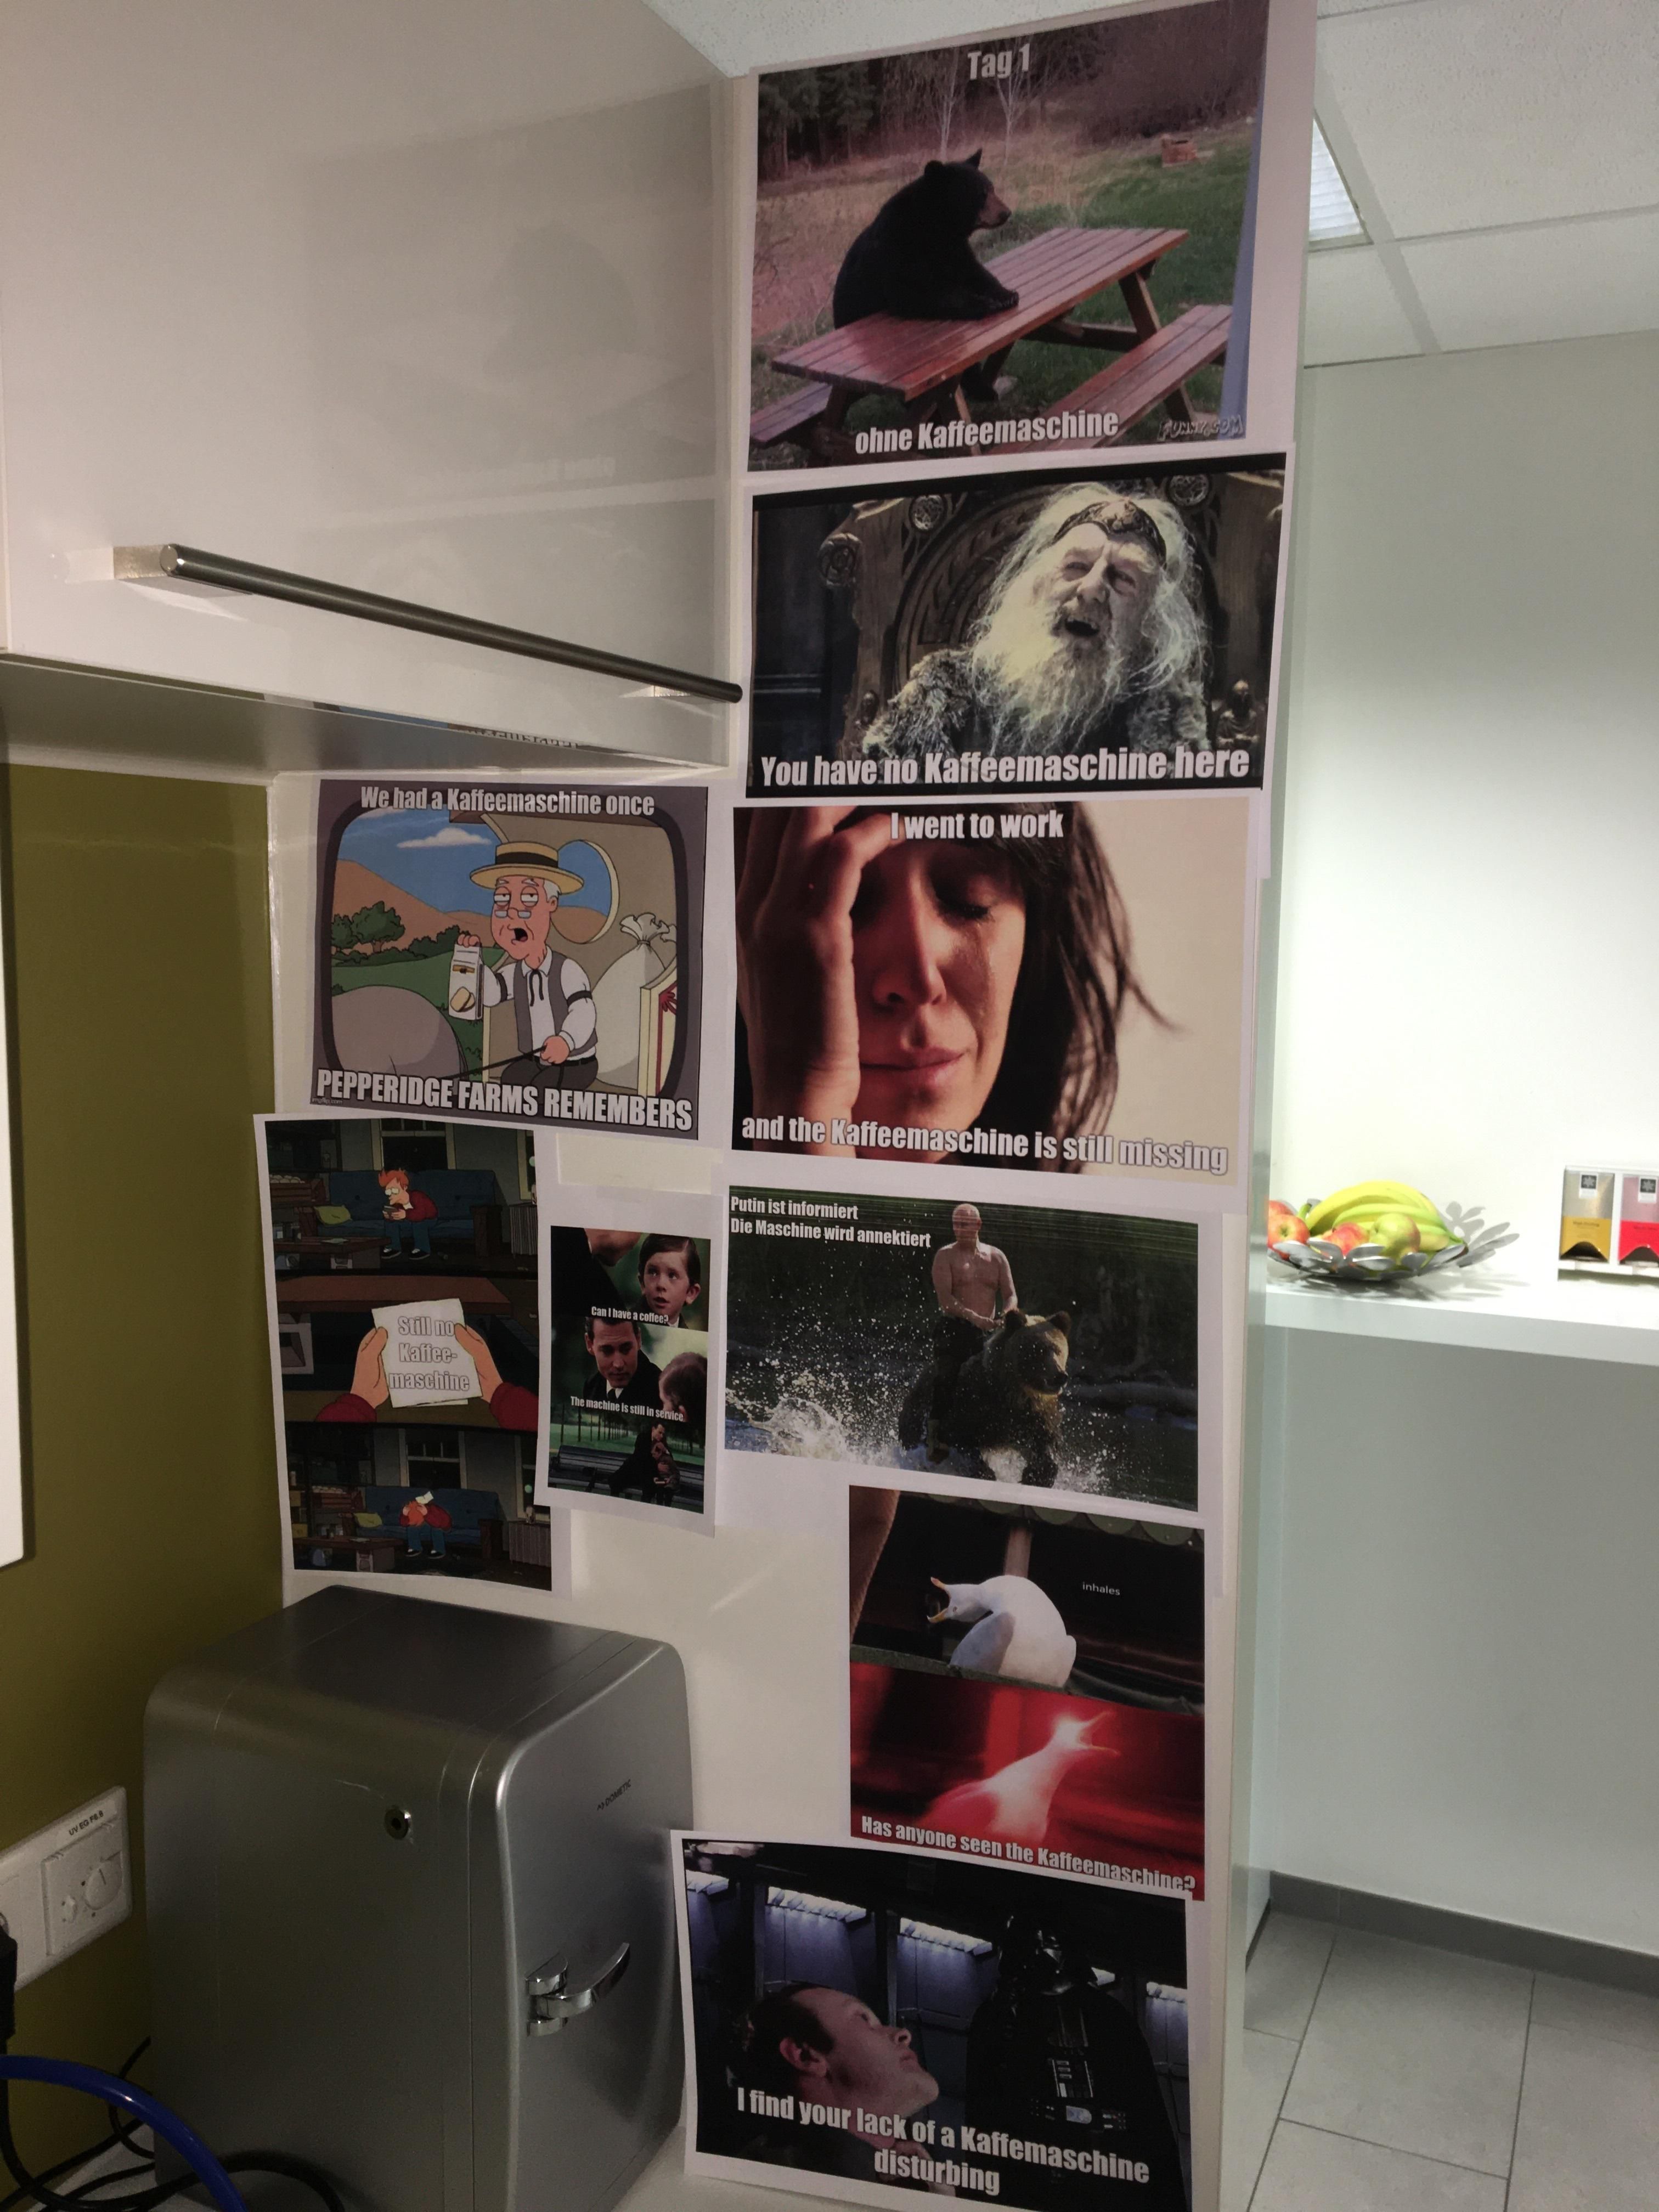 The coffee machine in our office is still missing, but my colleagues and I are making the best of it